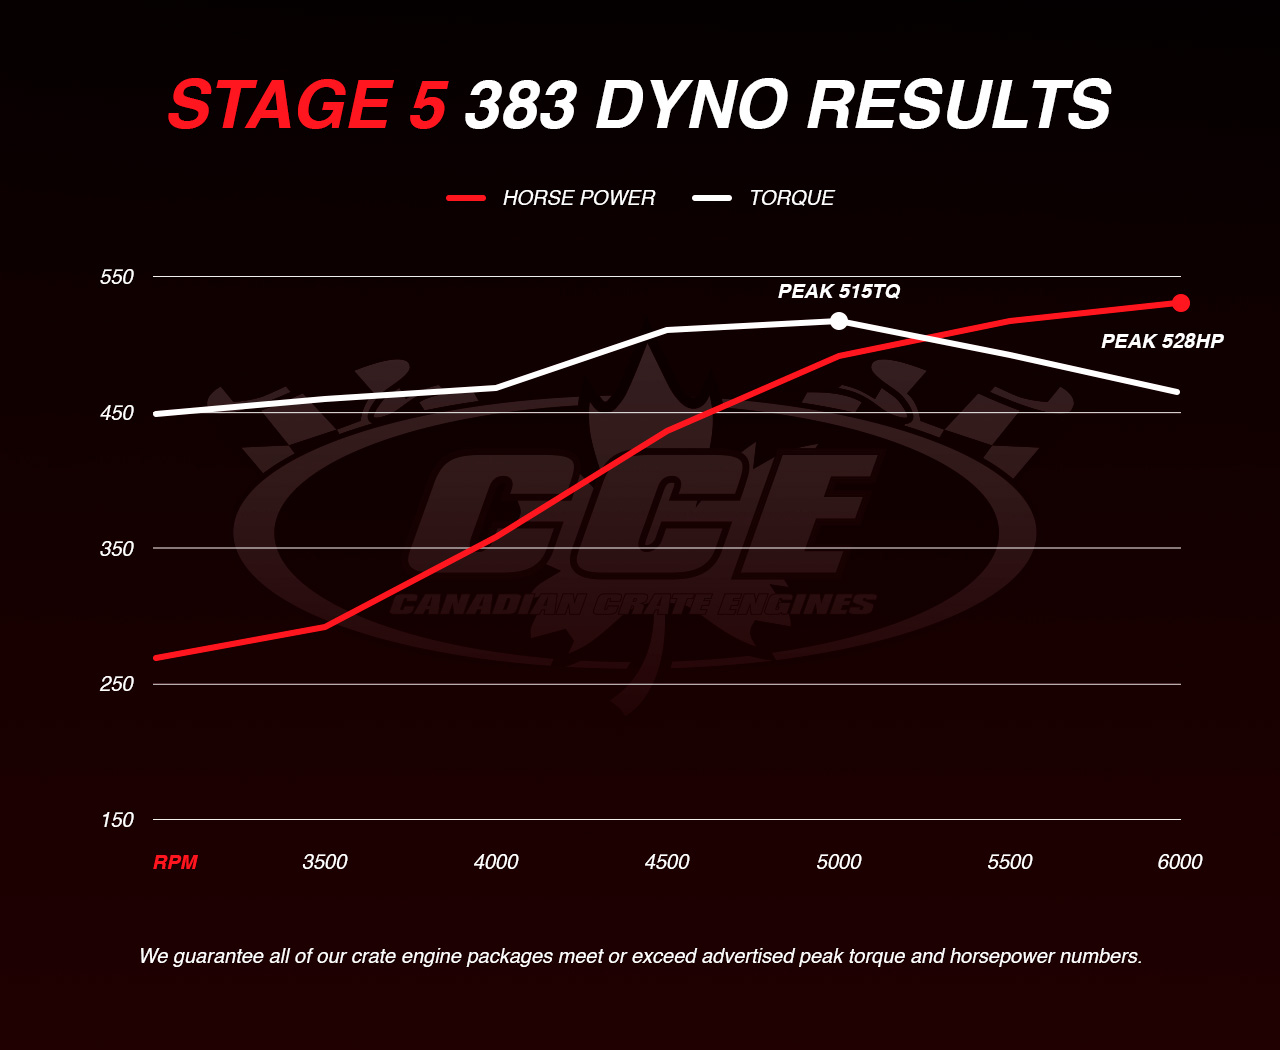 Dyno Graph Results for Chevy Stage 5 showing peak torque of 515TQ and peak horsepower of 528HP